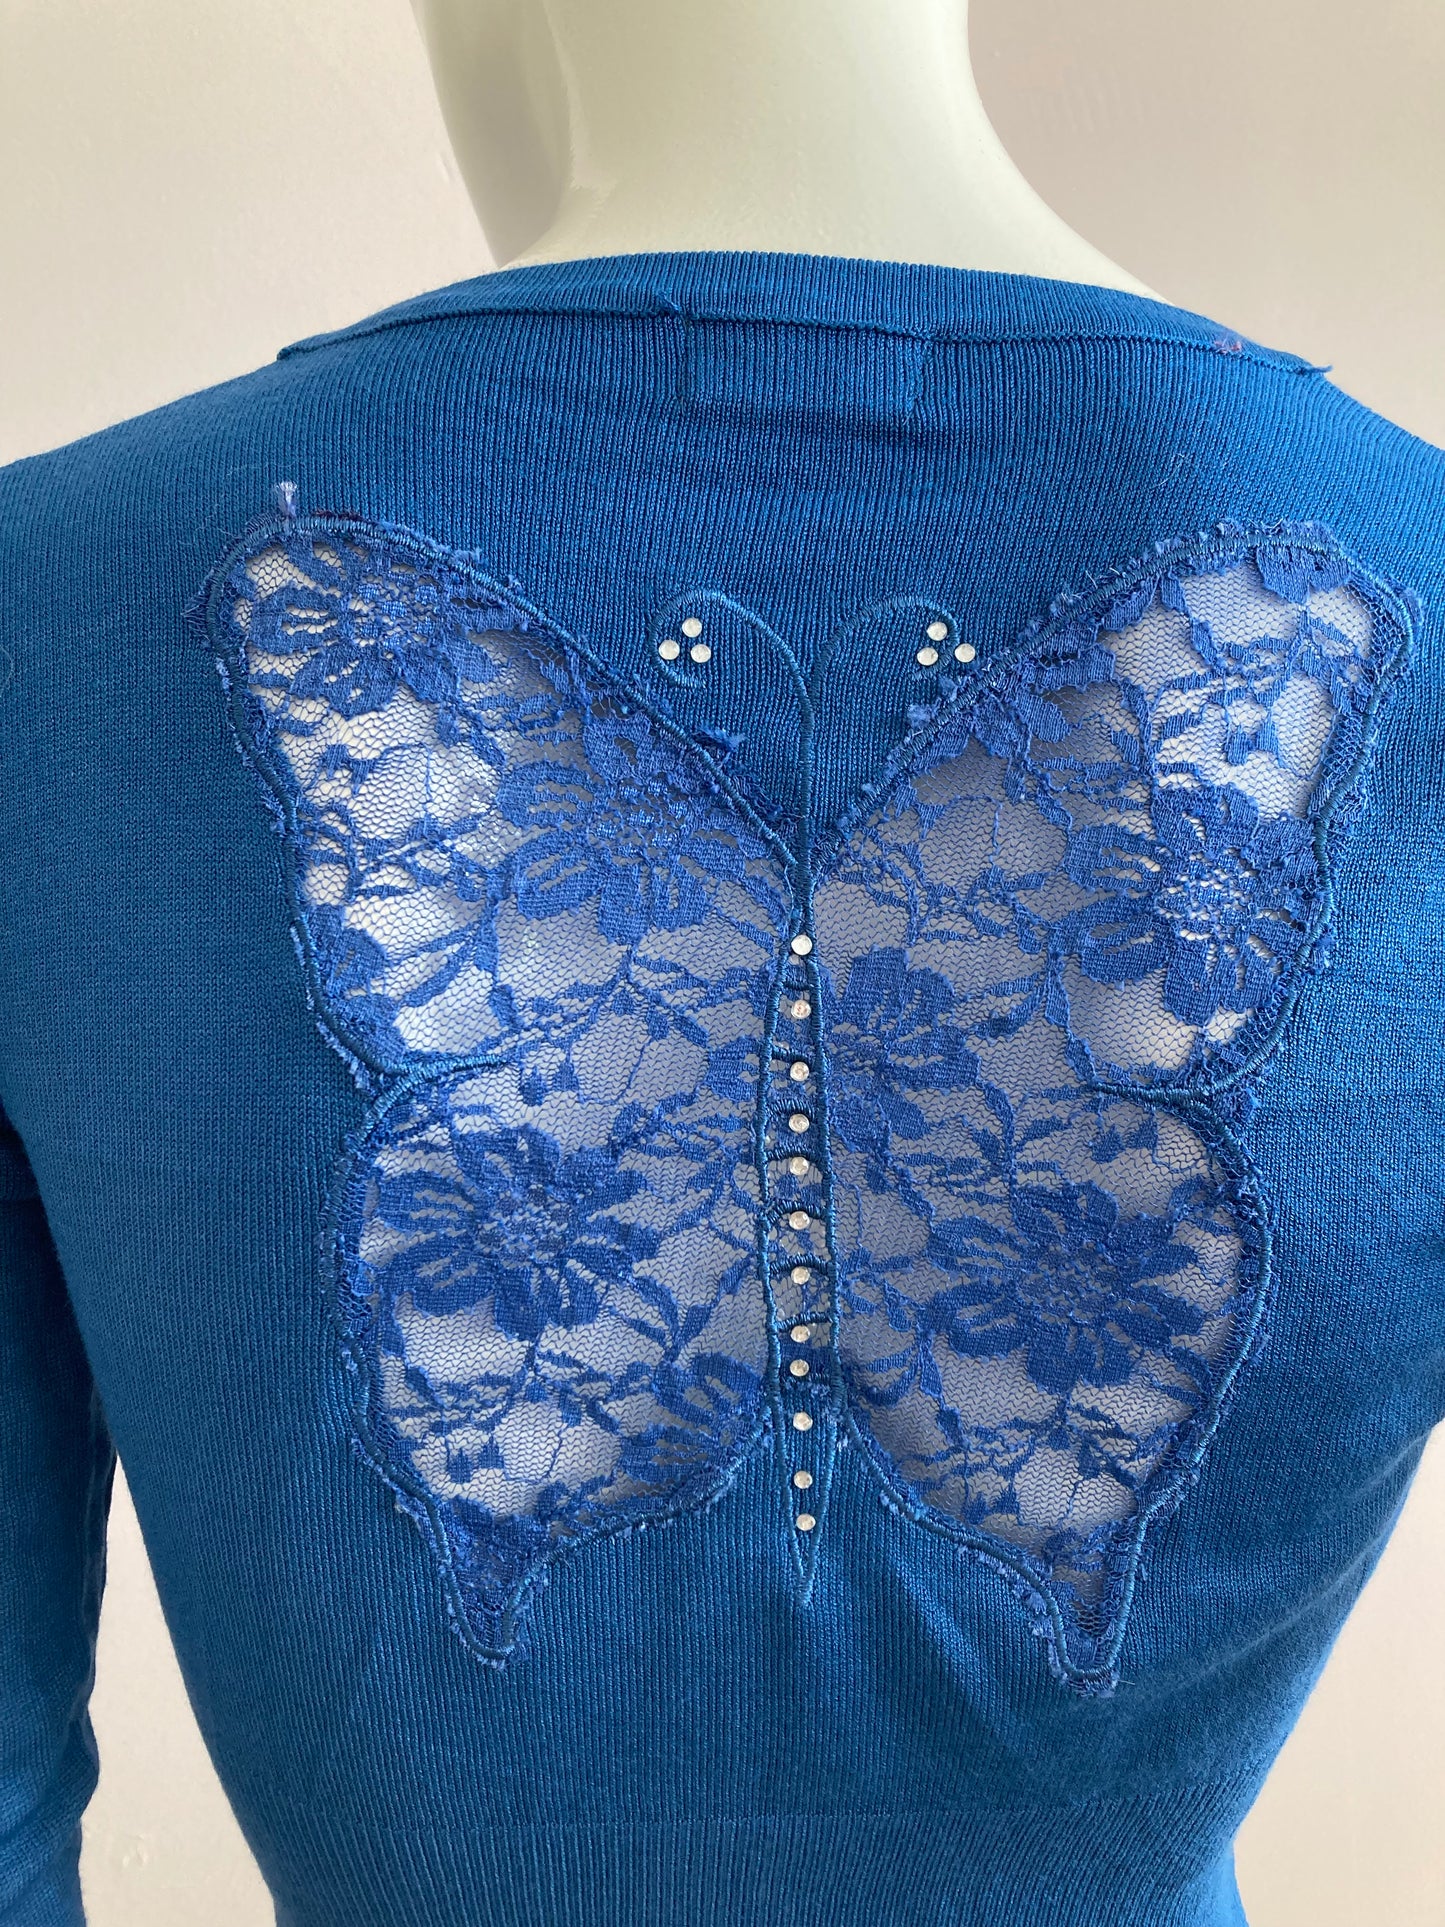 Short cardigan in blue with lace pattern on the back